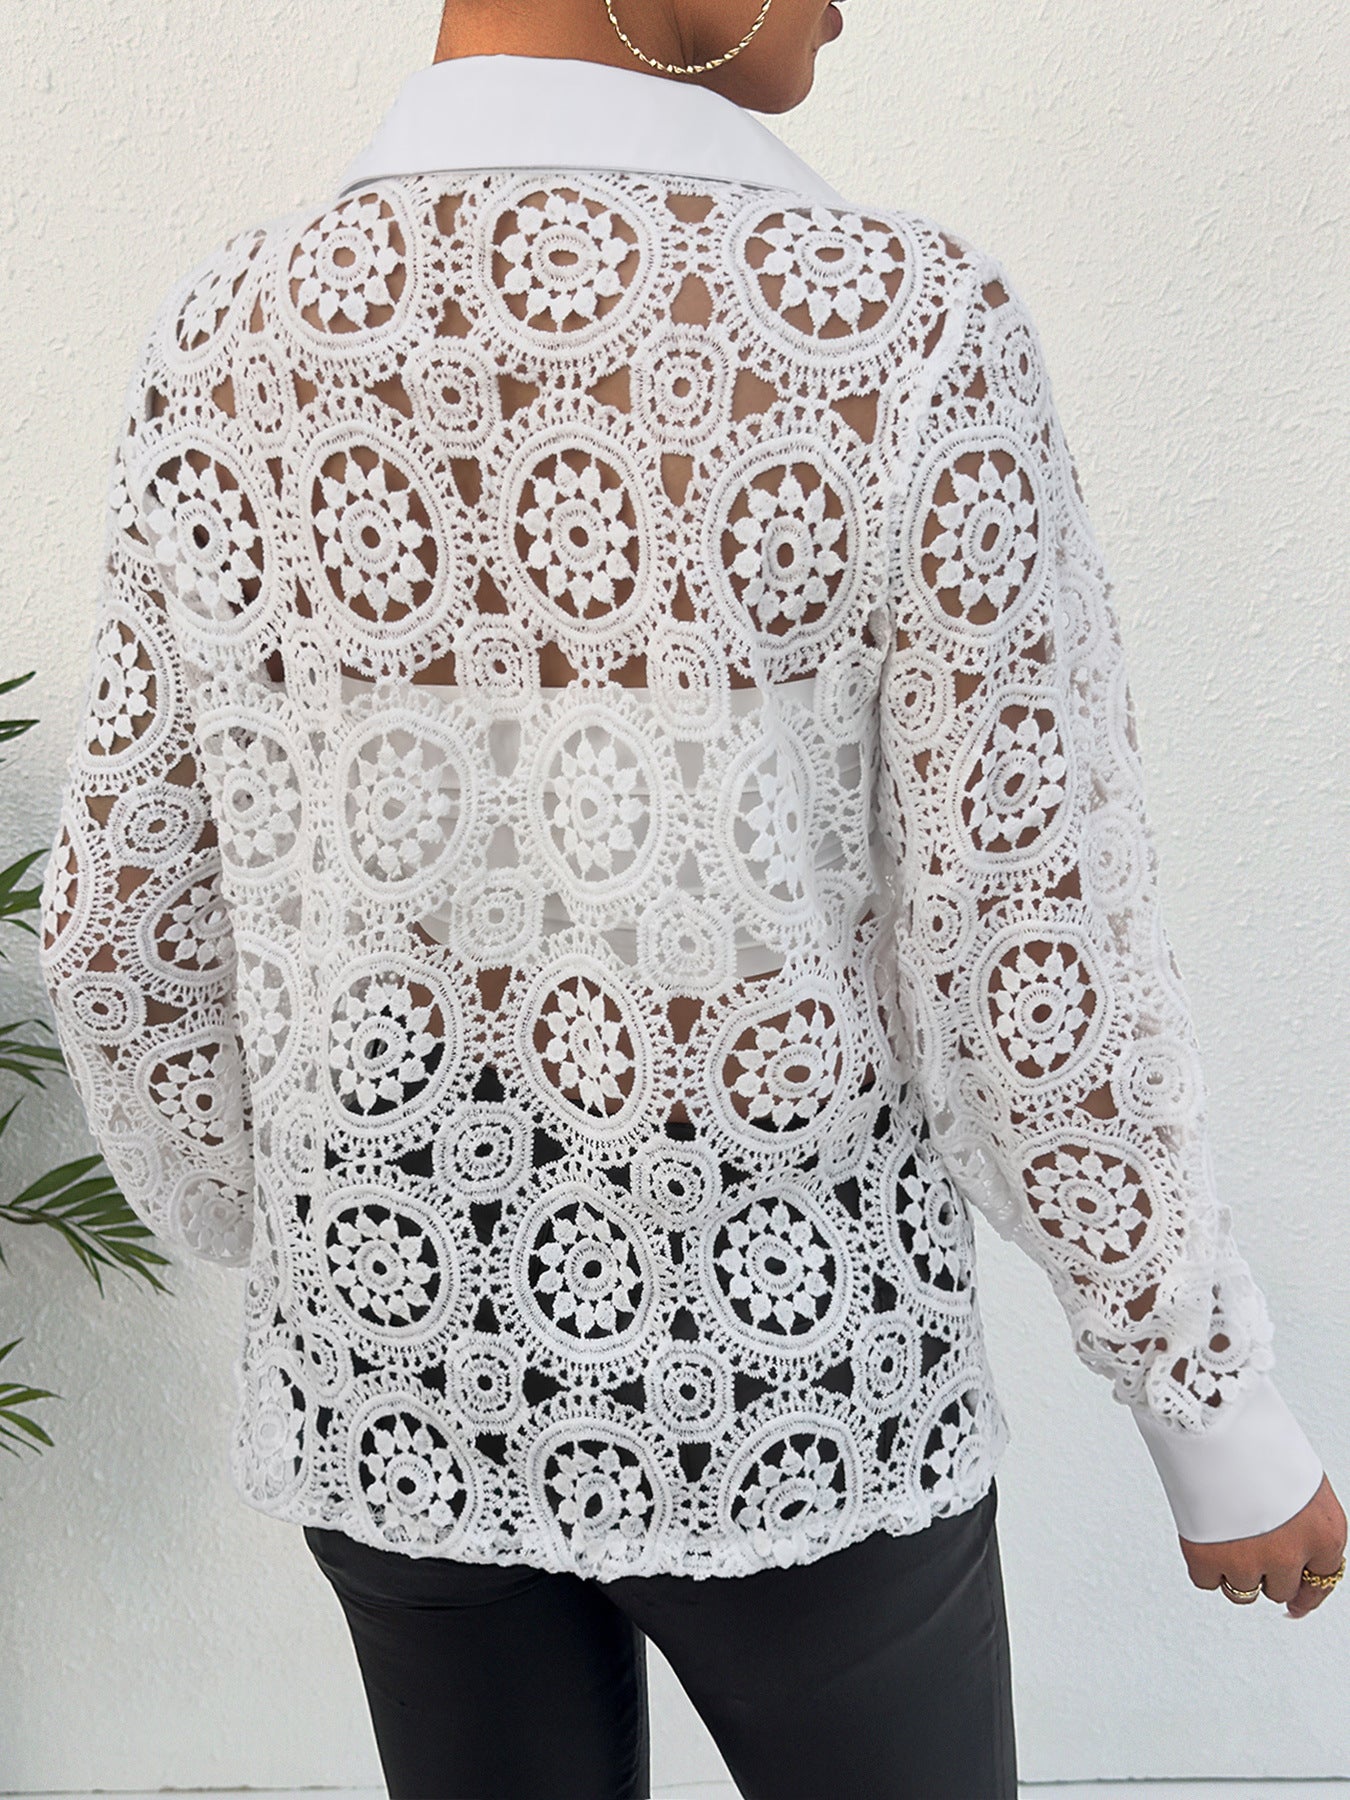 Women's Spring Long Sleeve Lace Shirt Blouses